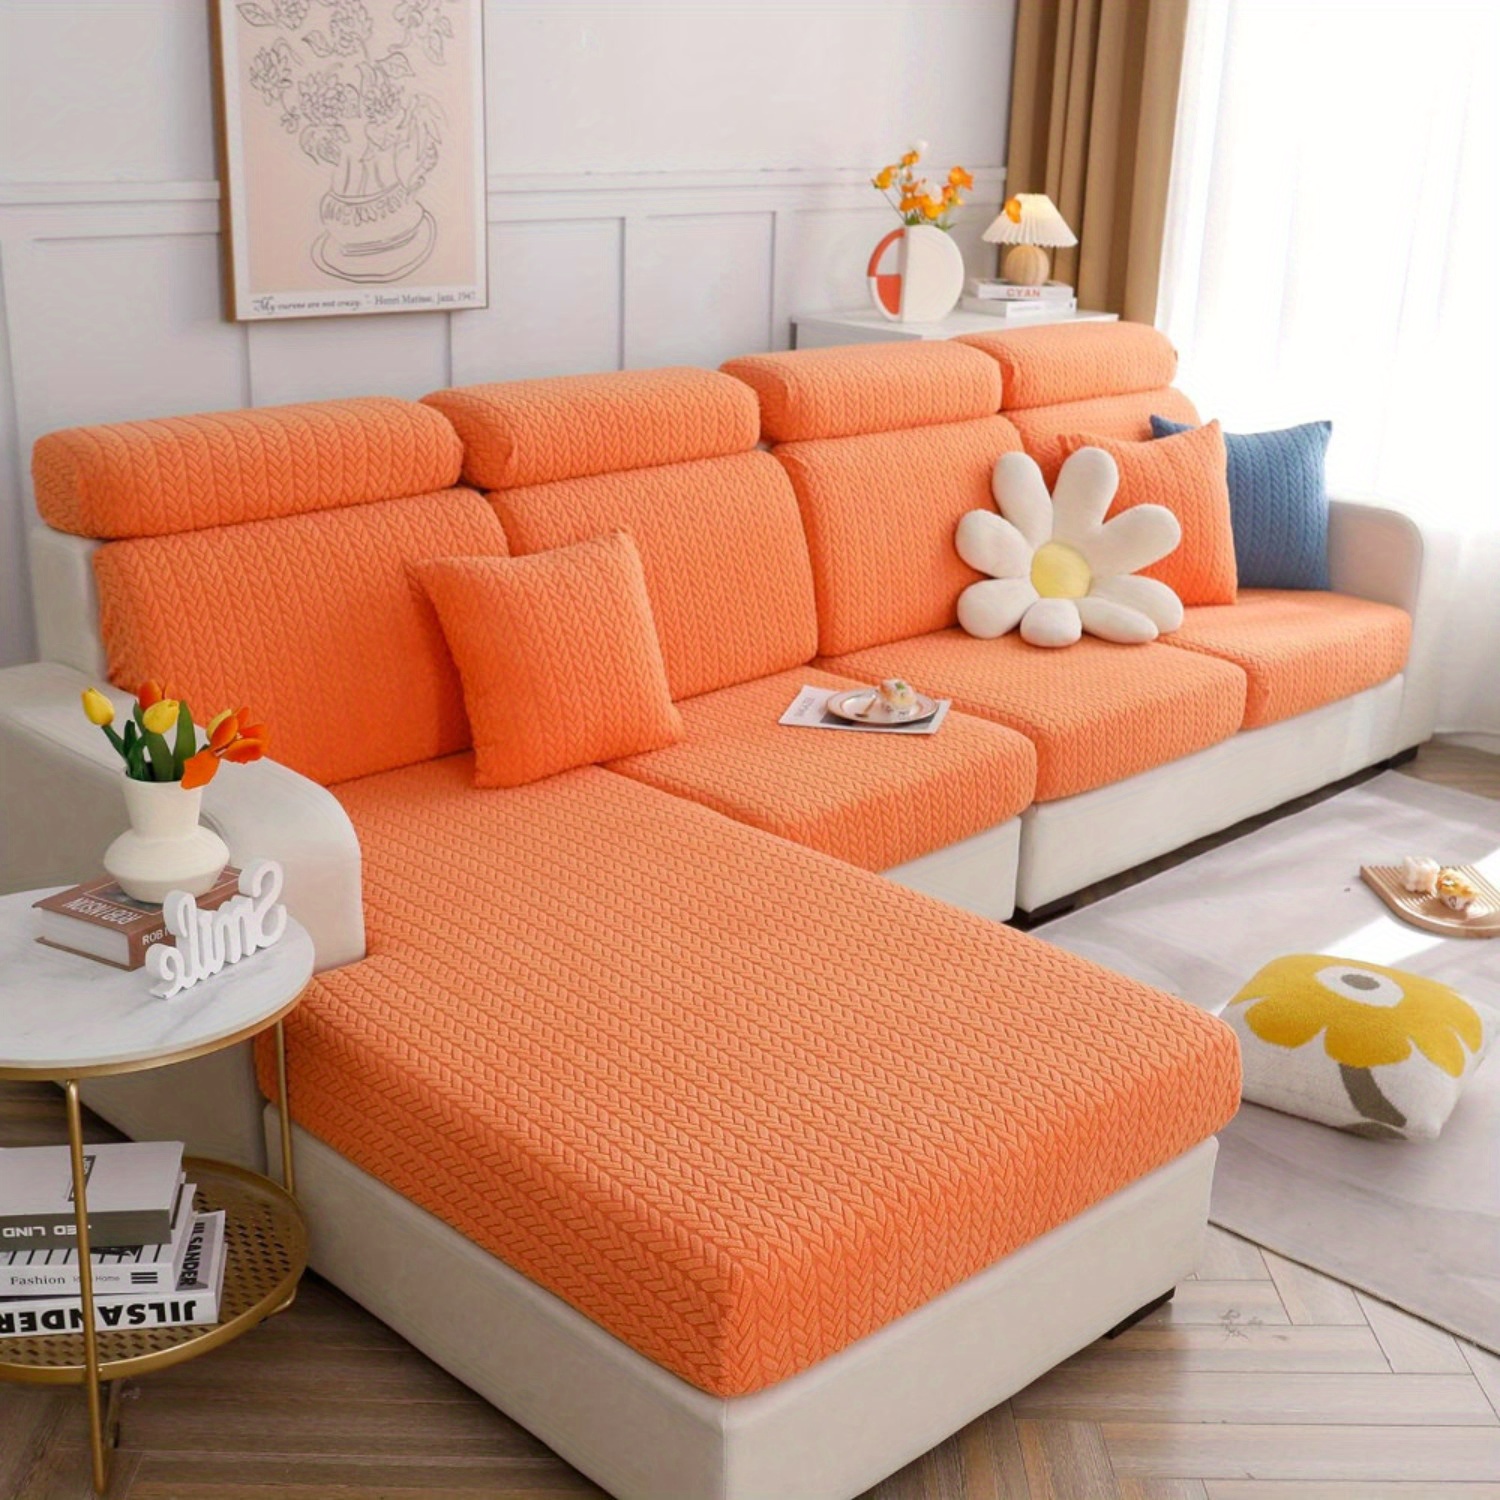 

Orange Couch Cover, Universal Stretch Chaise Sofa Slipcovers, Anti-slip L Shape Sofa Covers - Elastic Furniture Protector